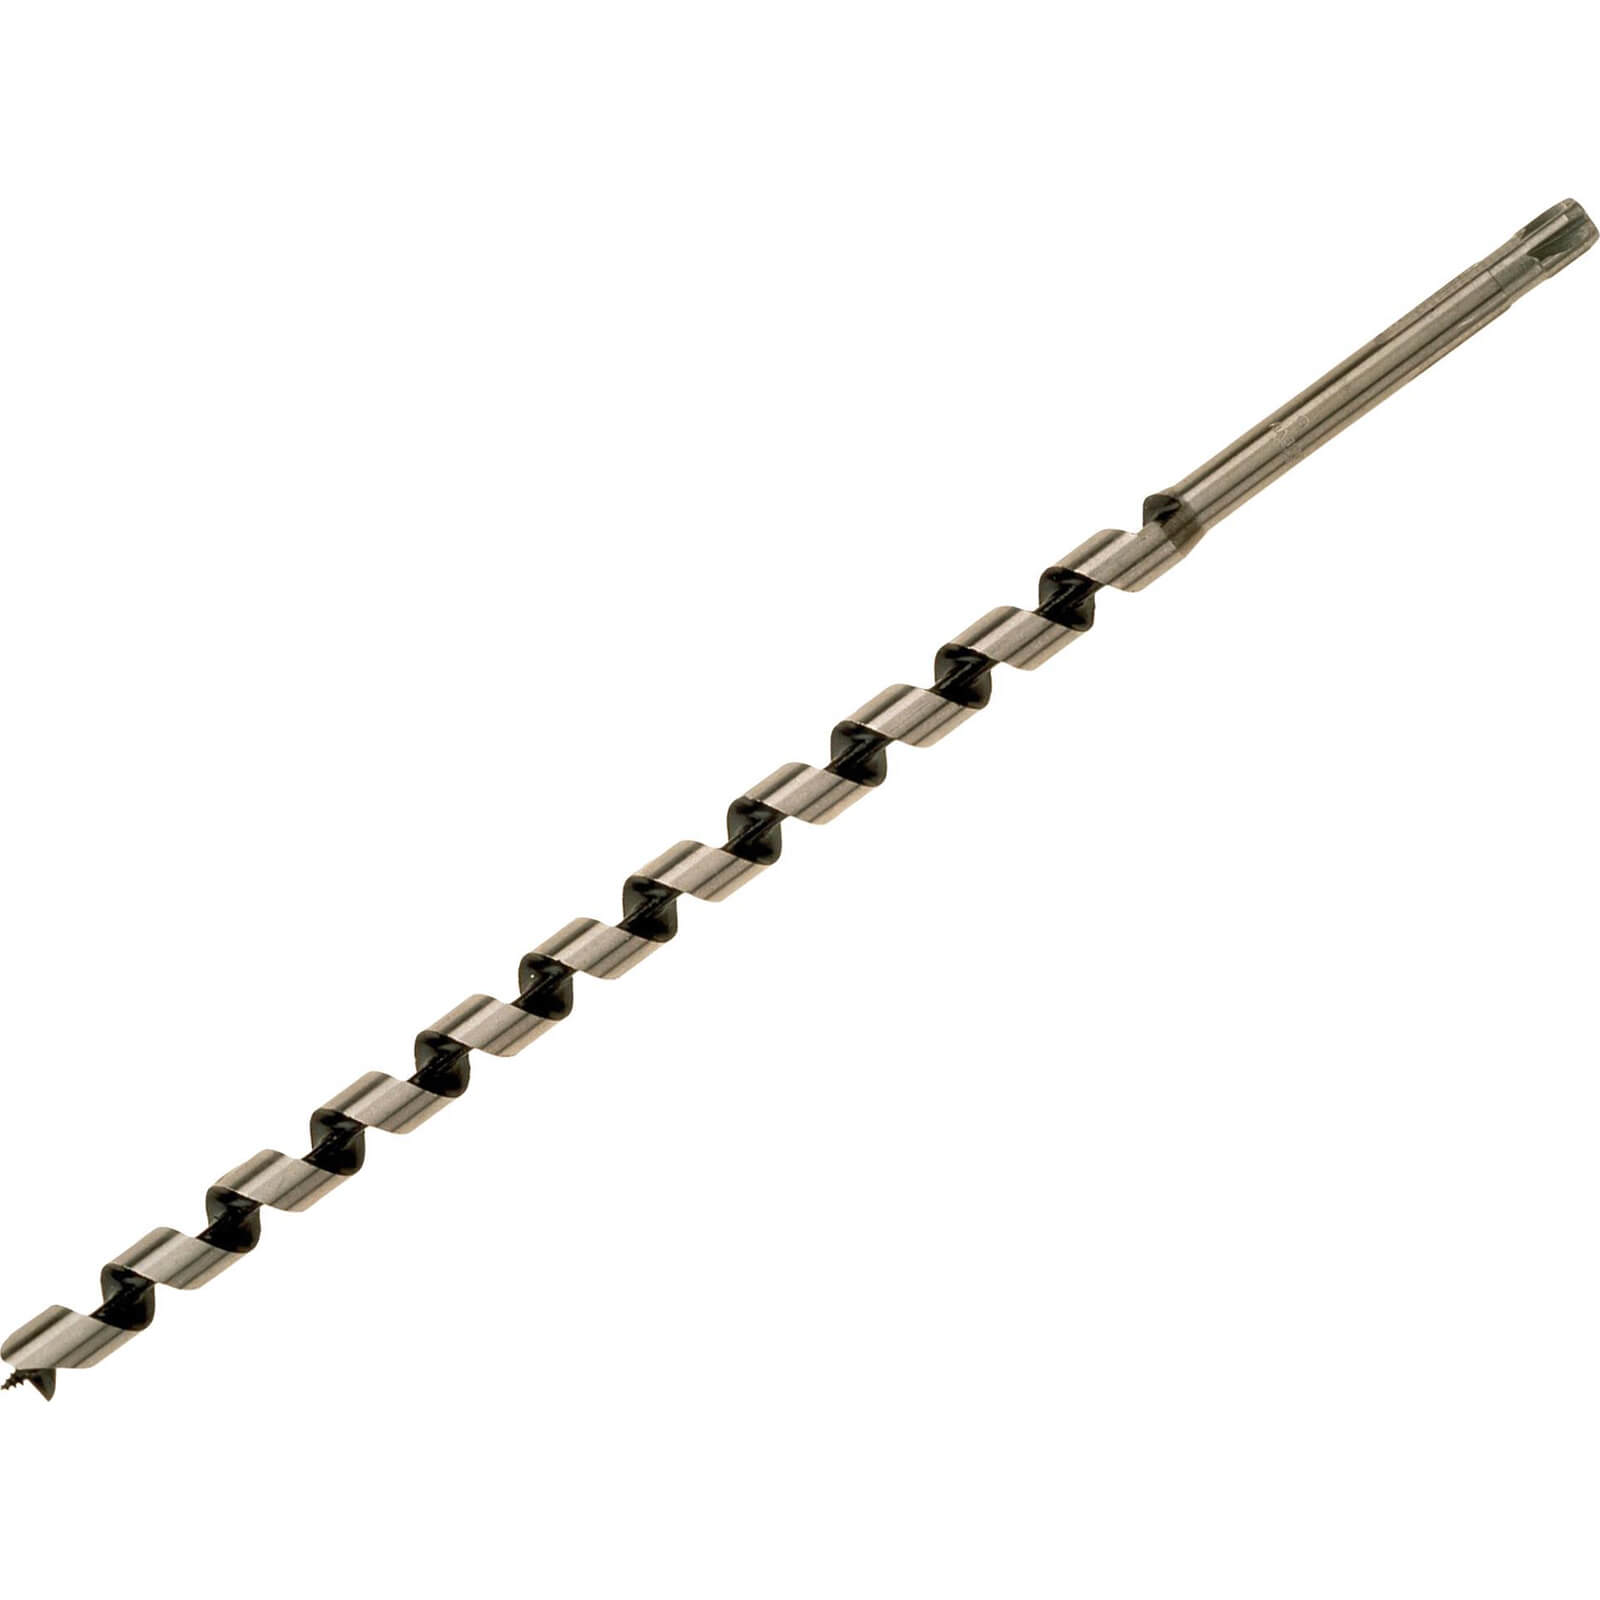 Photo of Bahco 9627 Series Long Combination Auger Drill Bit 10mm 460mm